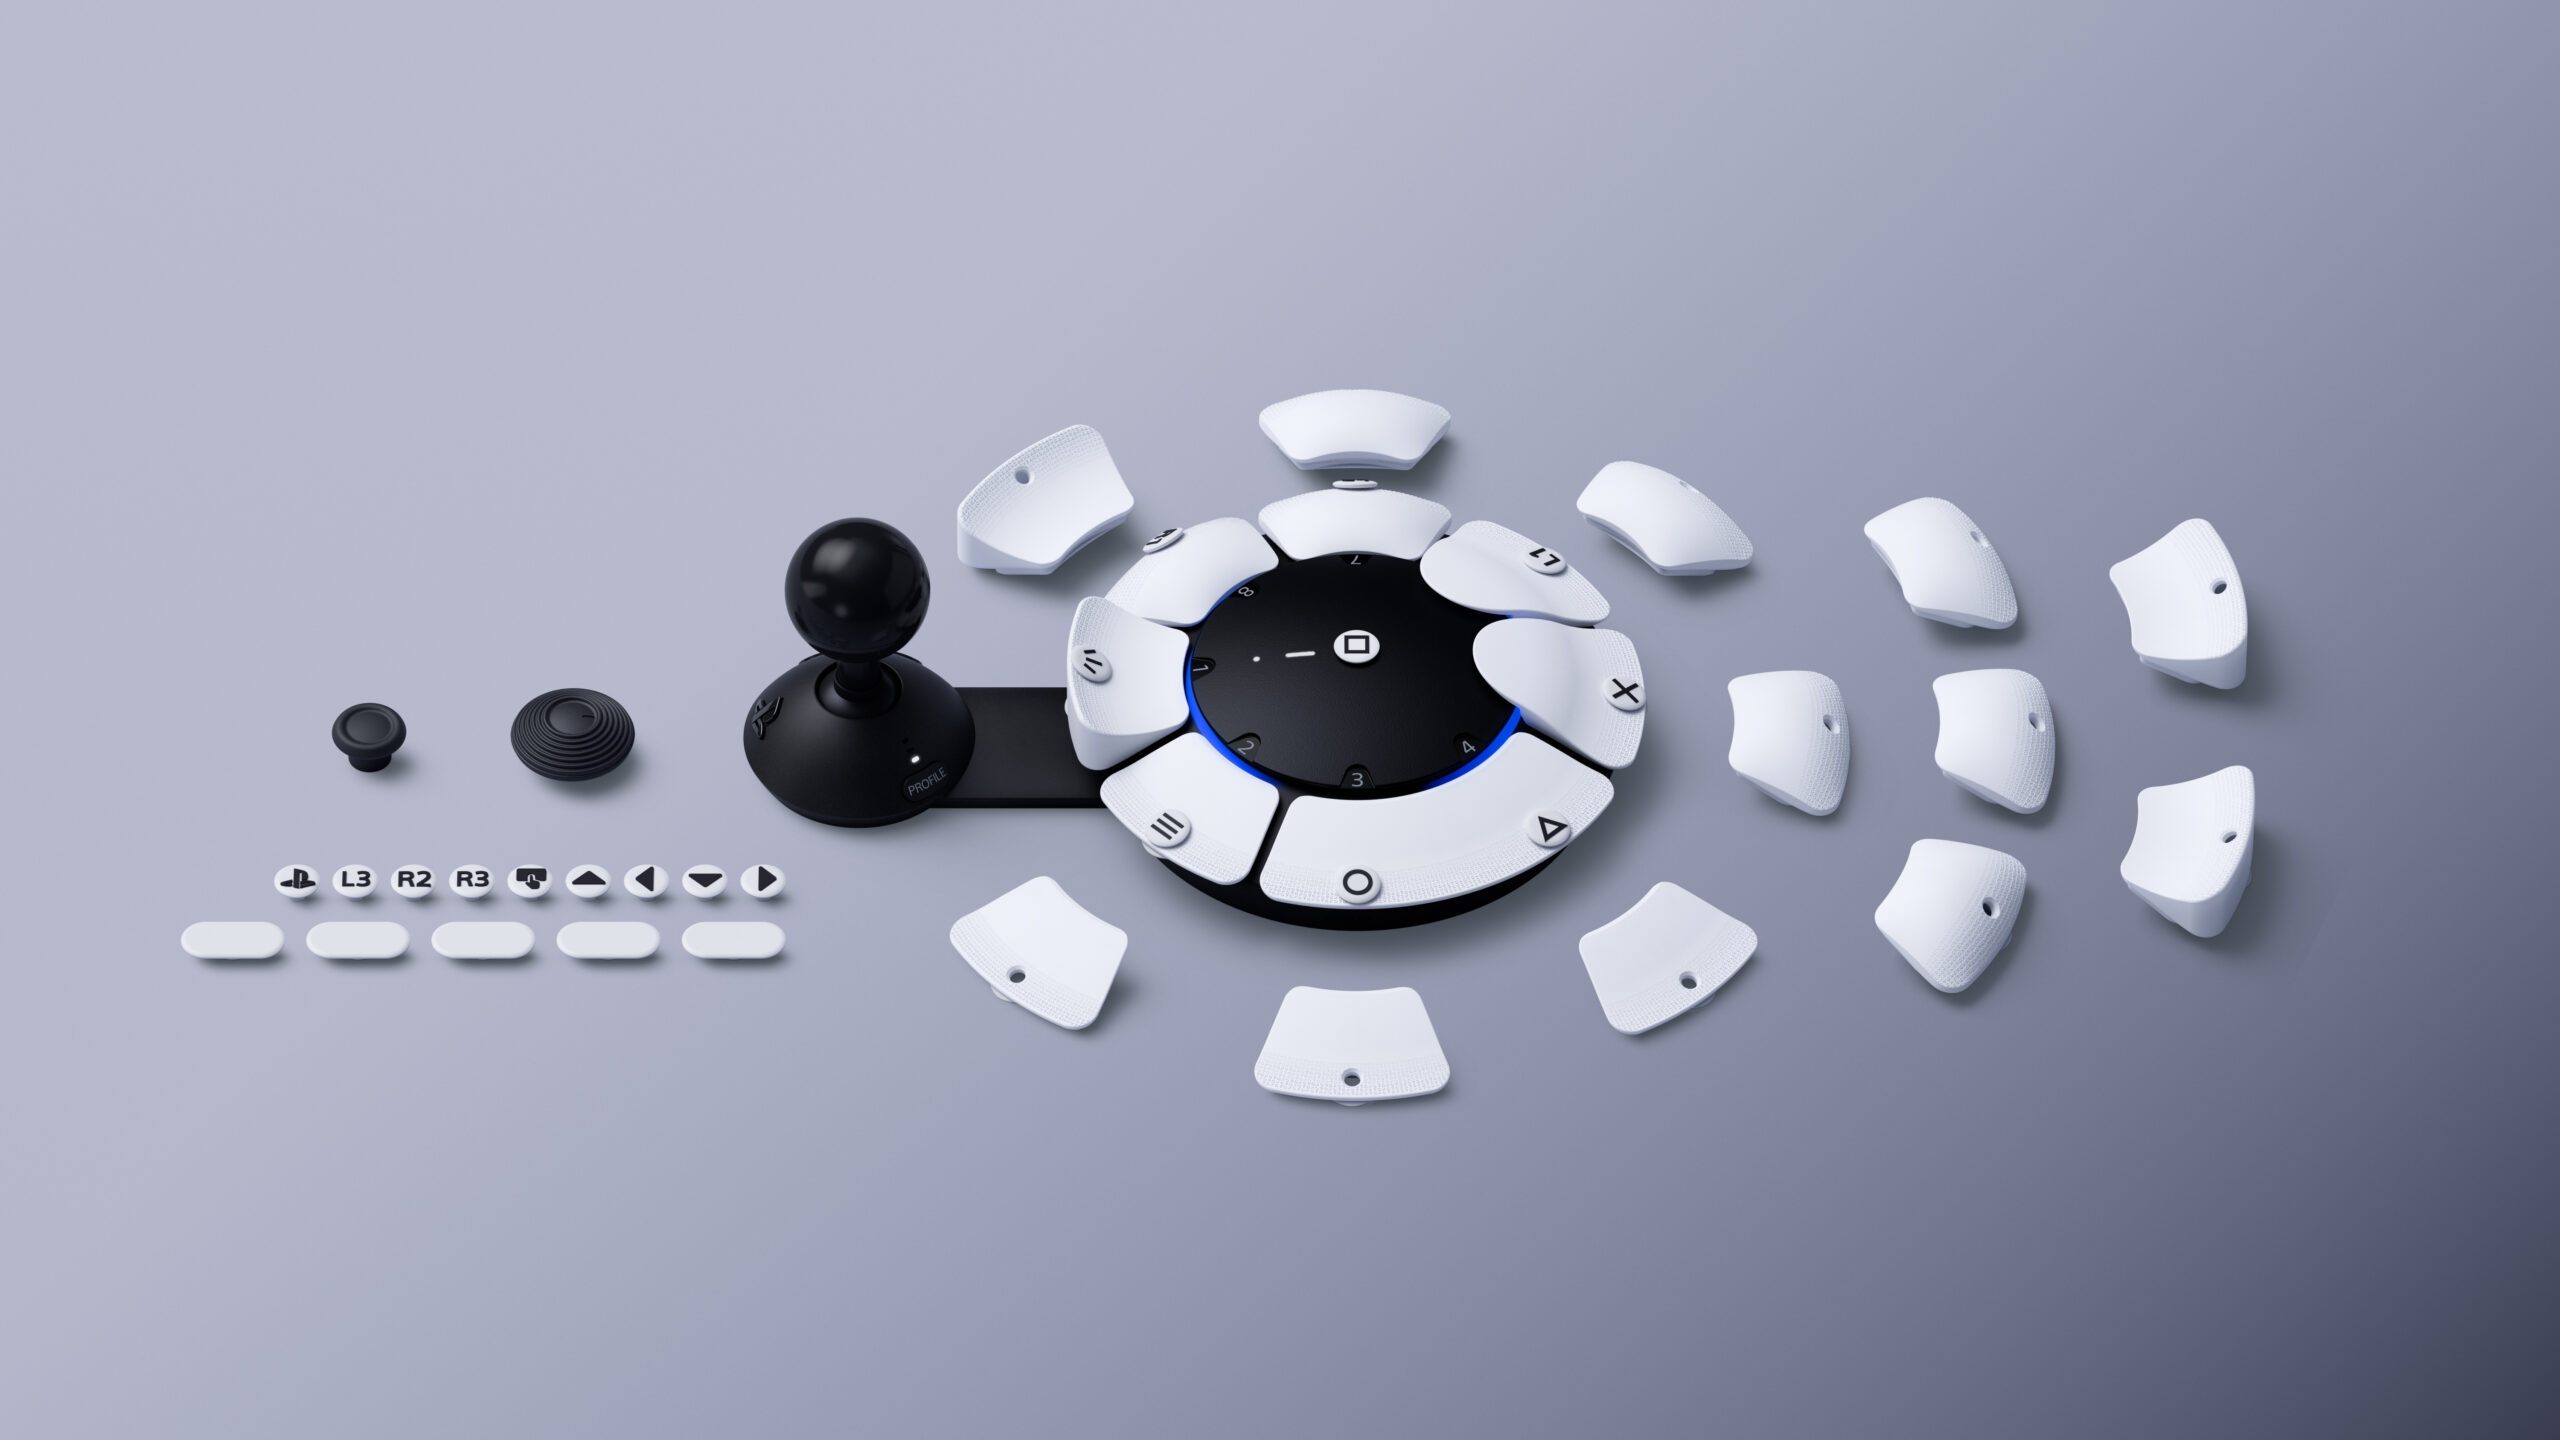 Image shows the Access Controller laid out flat, with its customizable pieces spread out around it.